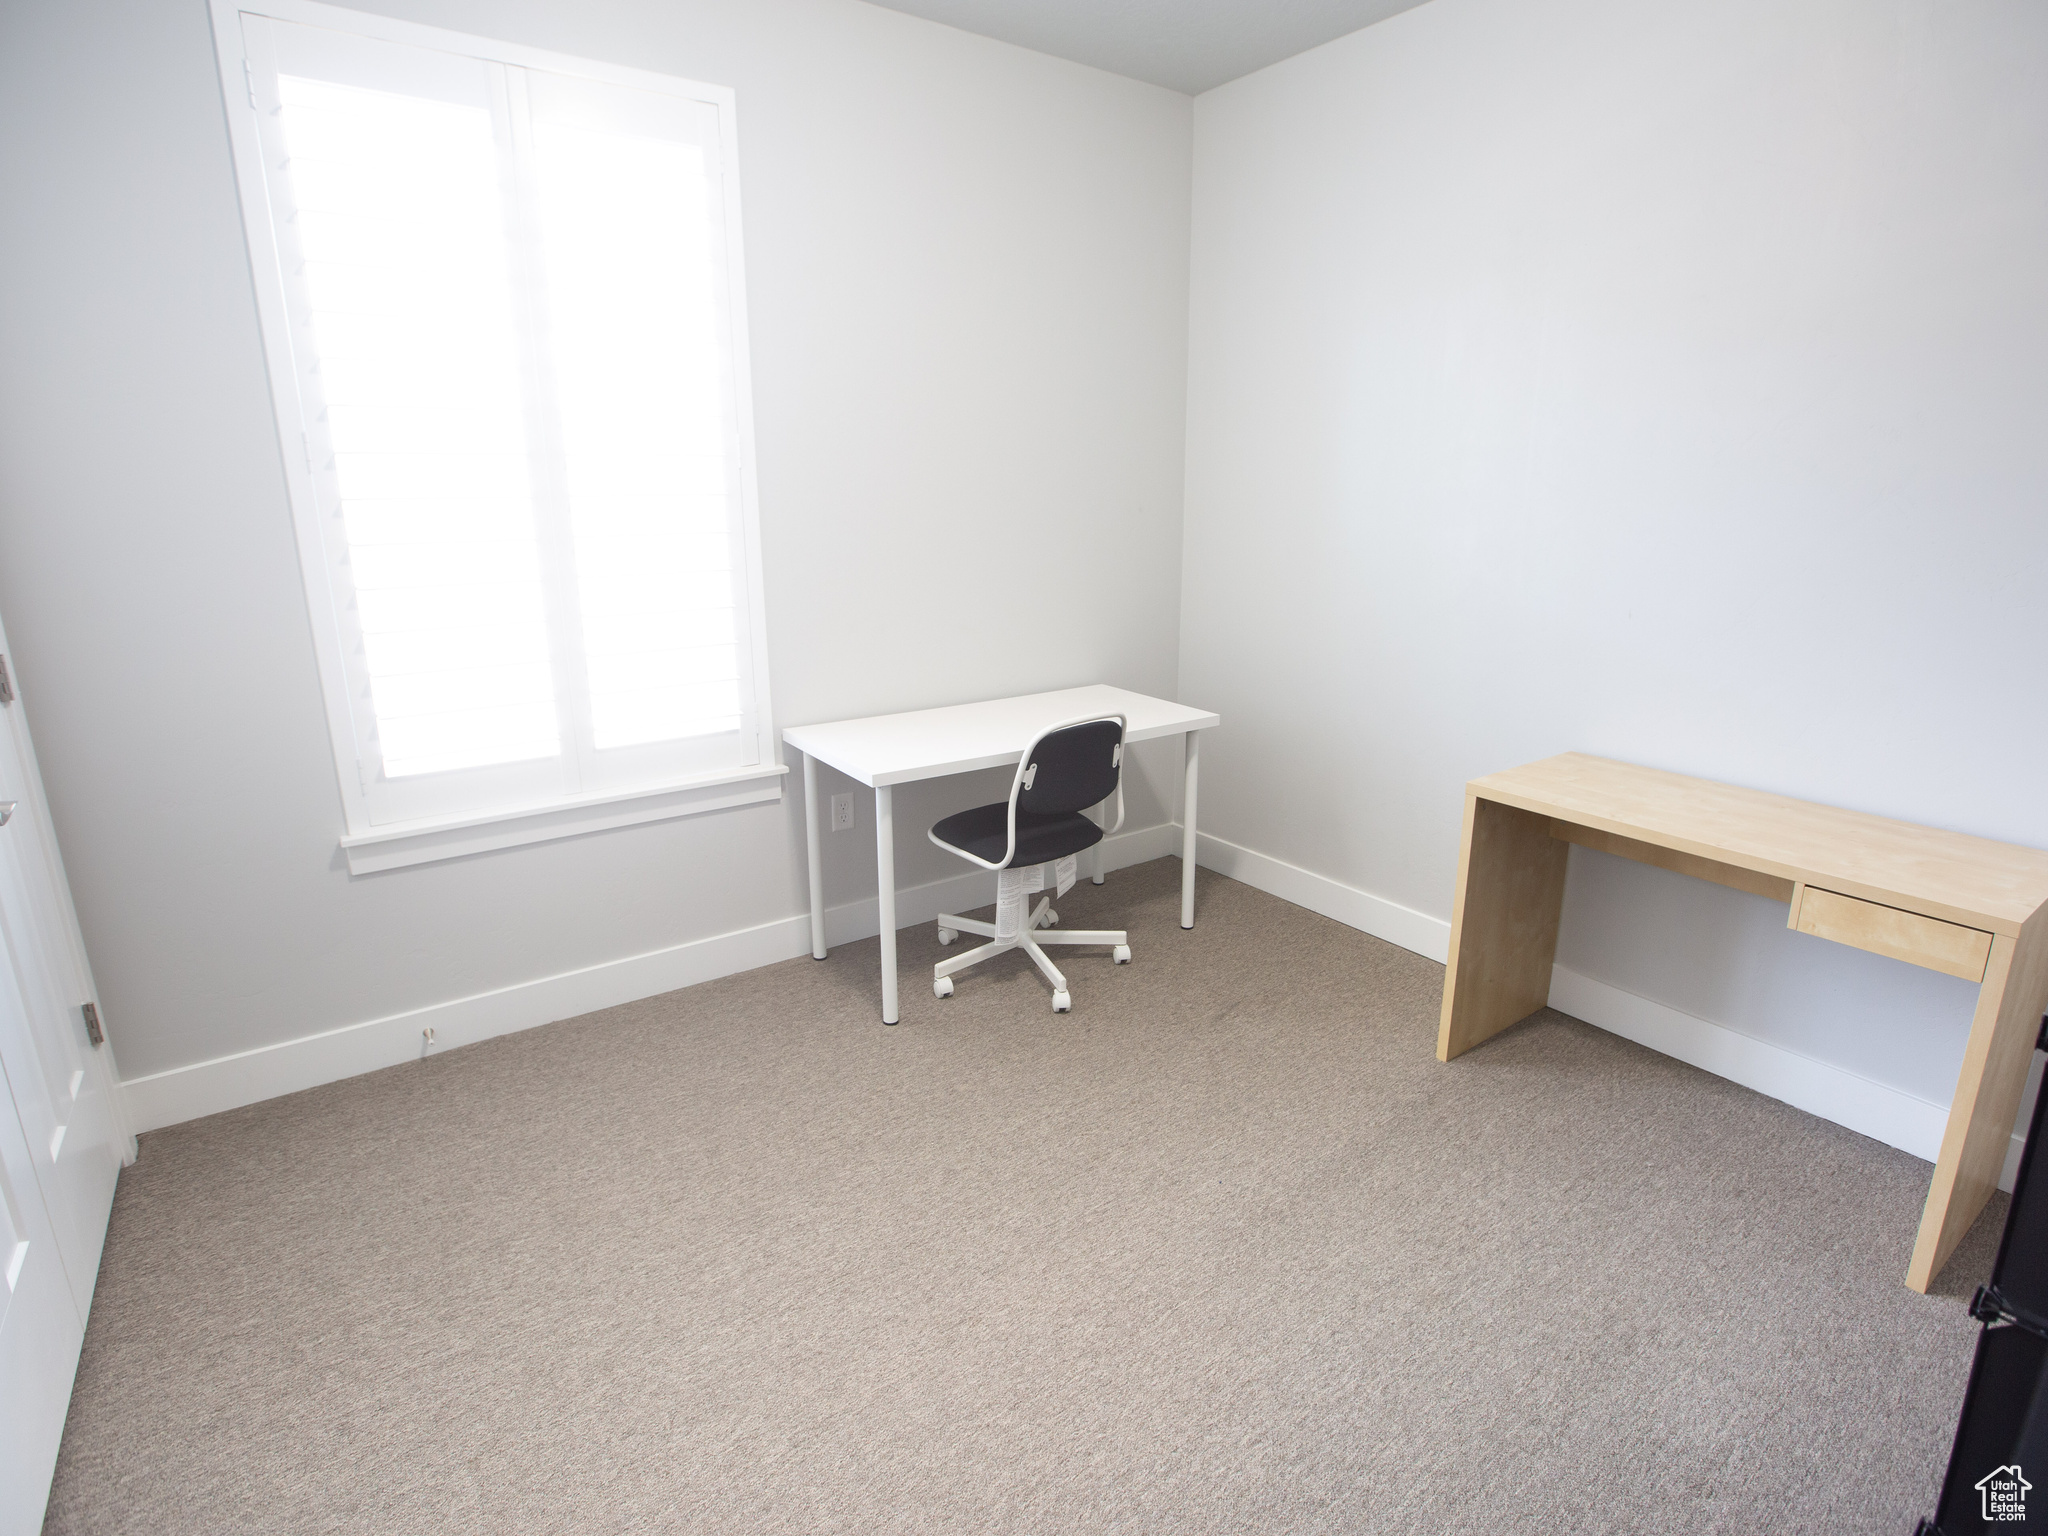 Unfurnished office with light carpet